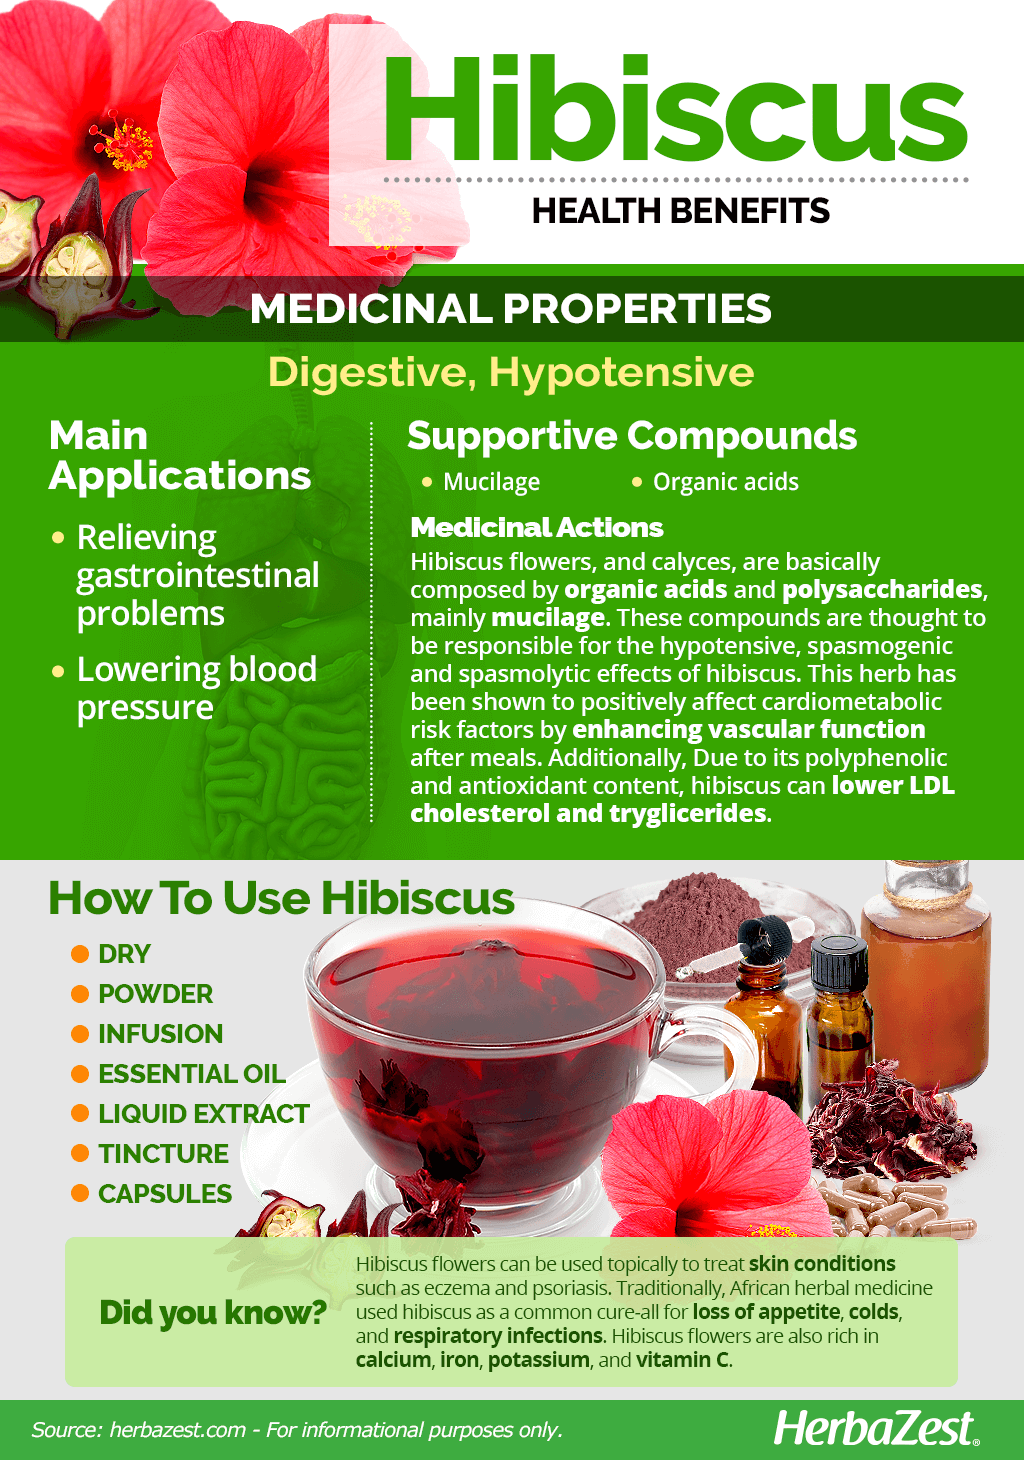 All About Hibiscus